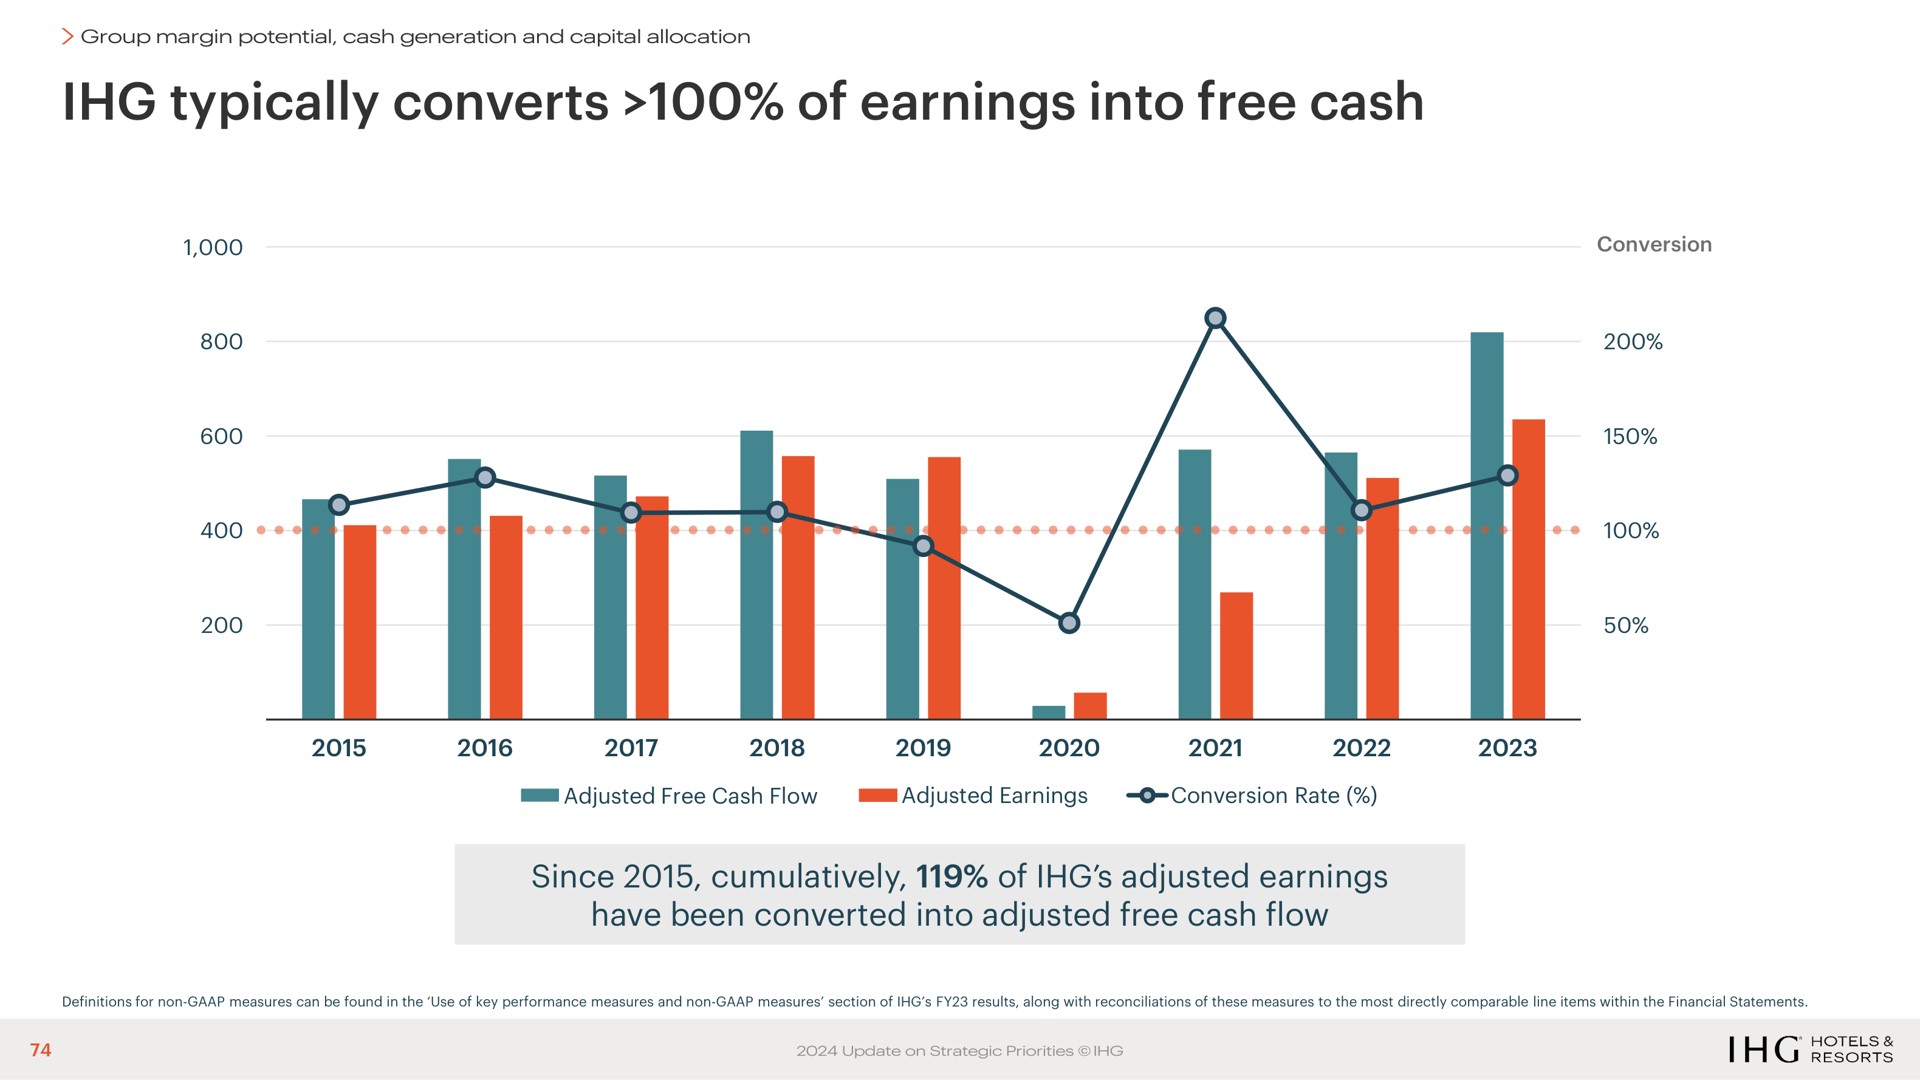 typically converts of earnings into free cash | IHG Hotels